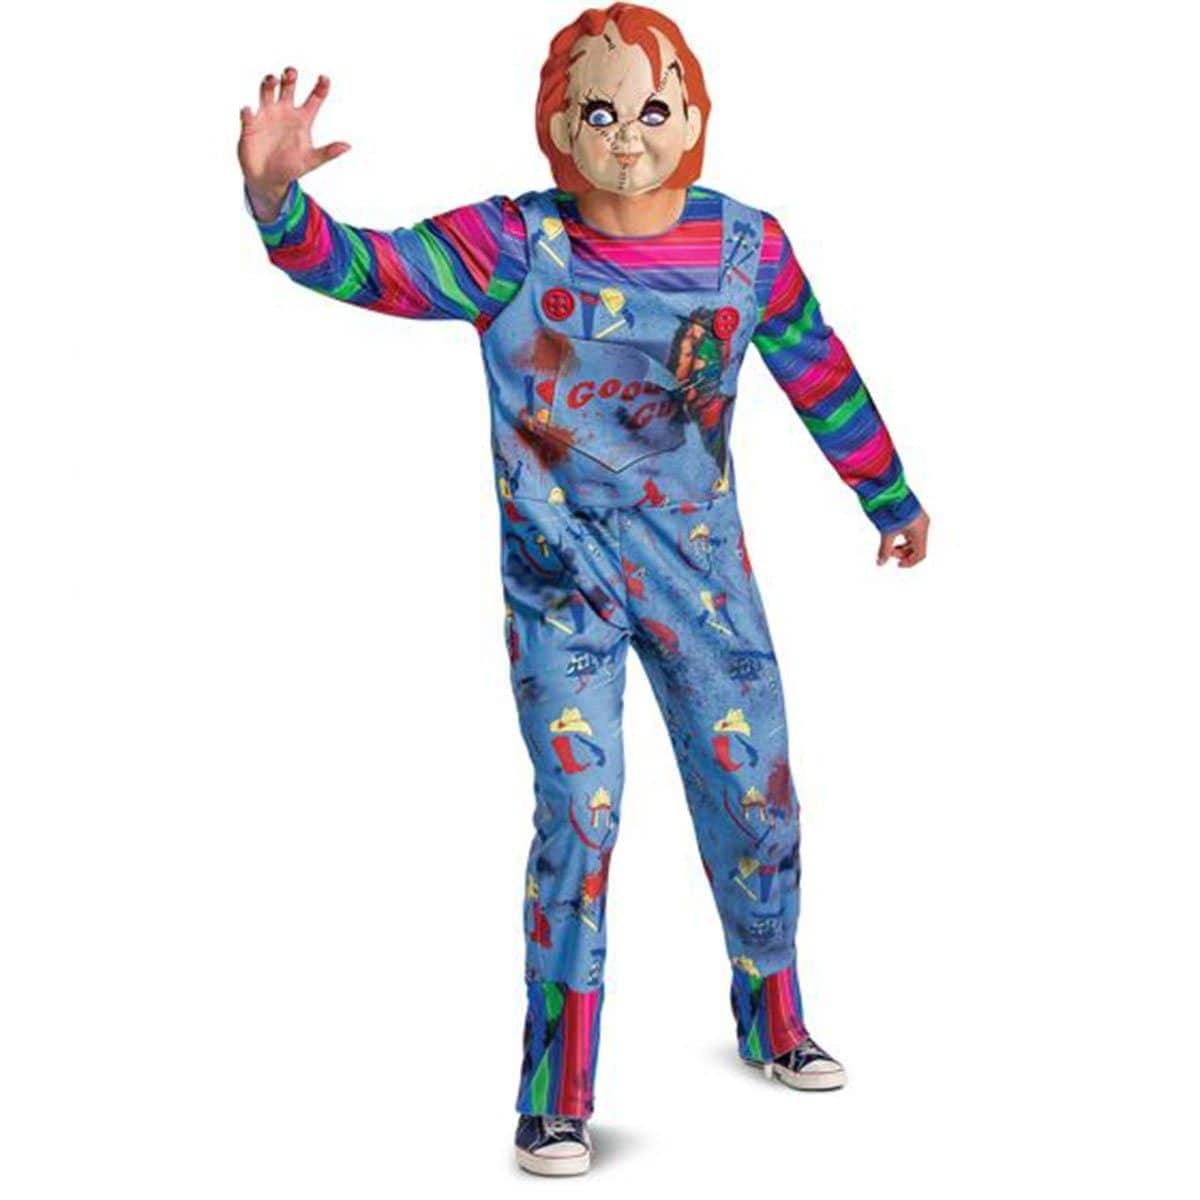 Buy Costumes Chucky Deluxe Costume for Adults sold at Party Expert